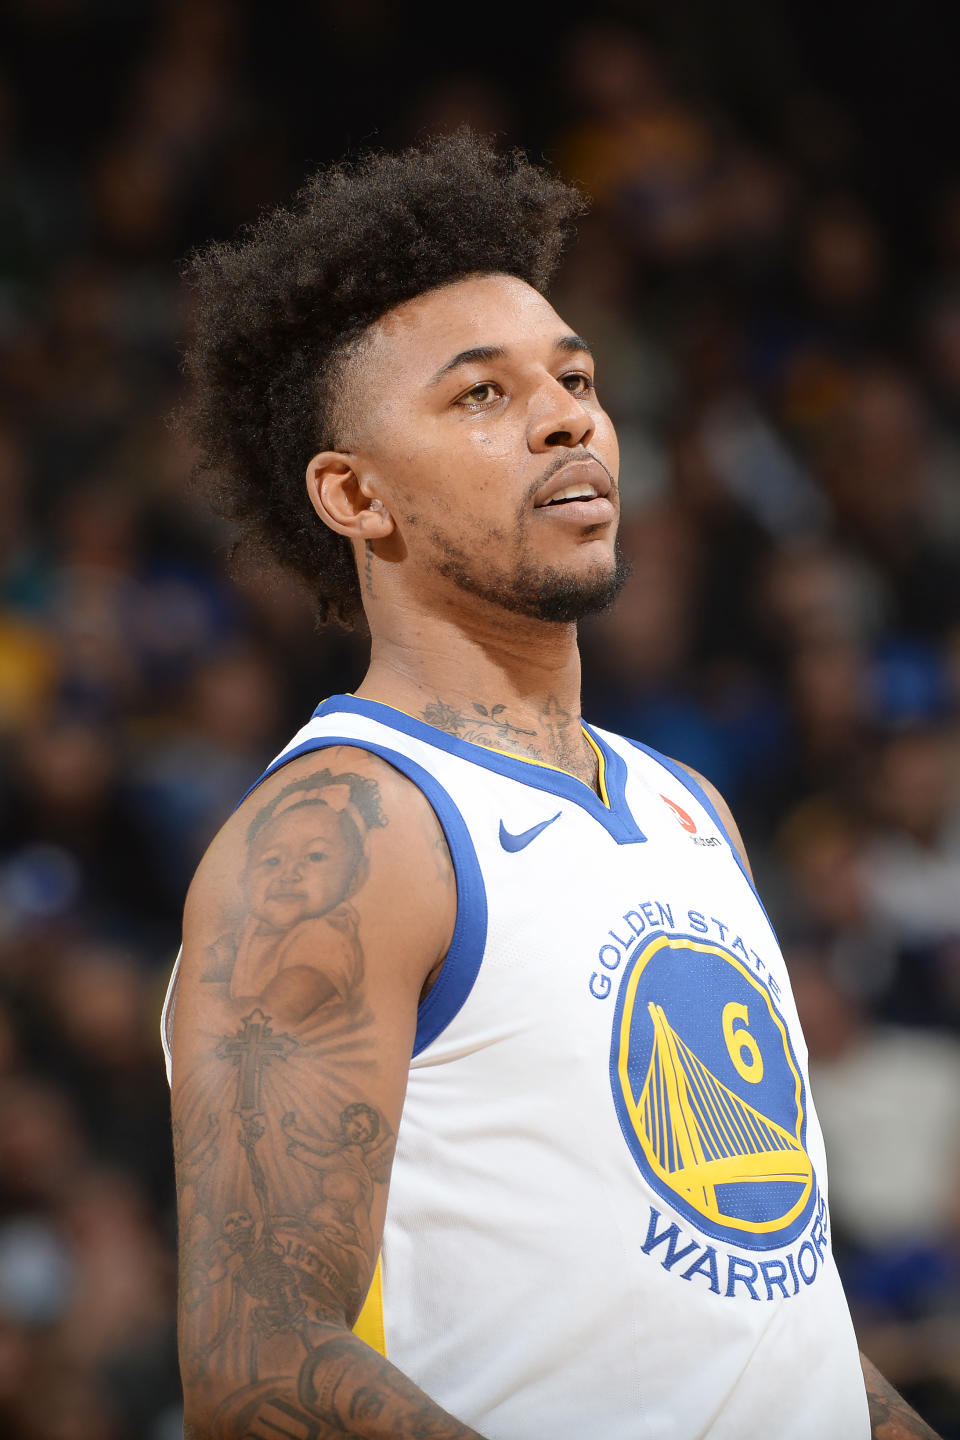 Nick Young, who used to play for the Lakers, is now on the Golden State Warriors. Here he is on the court on Dec. 11. (Photo: Noah Graham/NBAE via Getty Images)